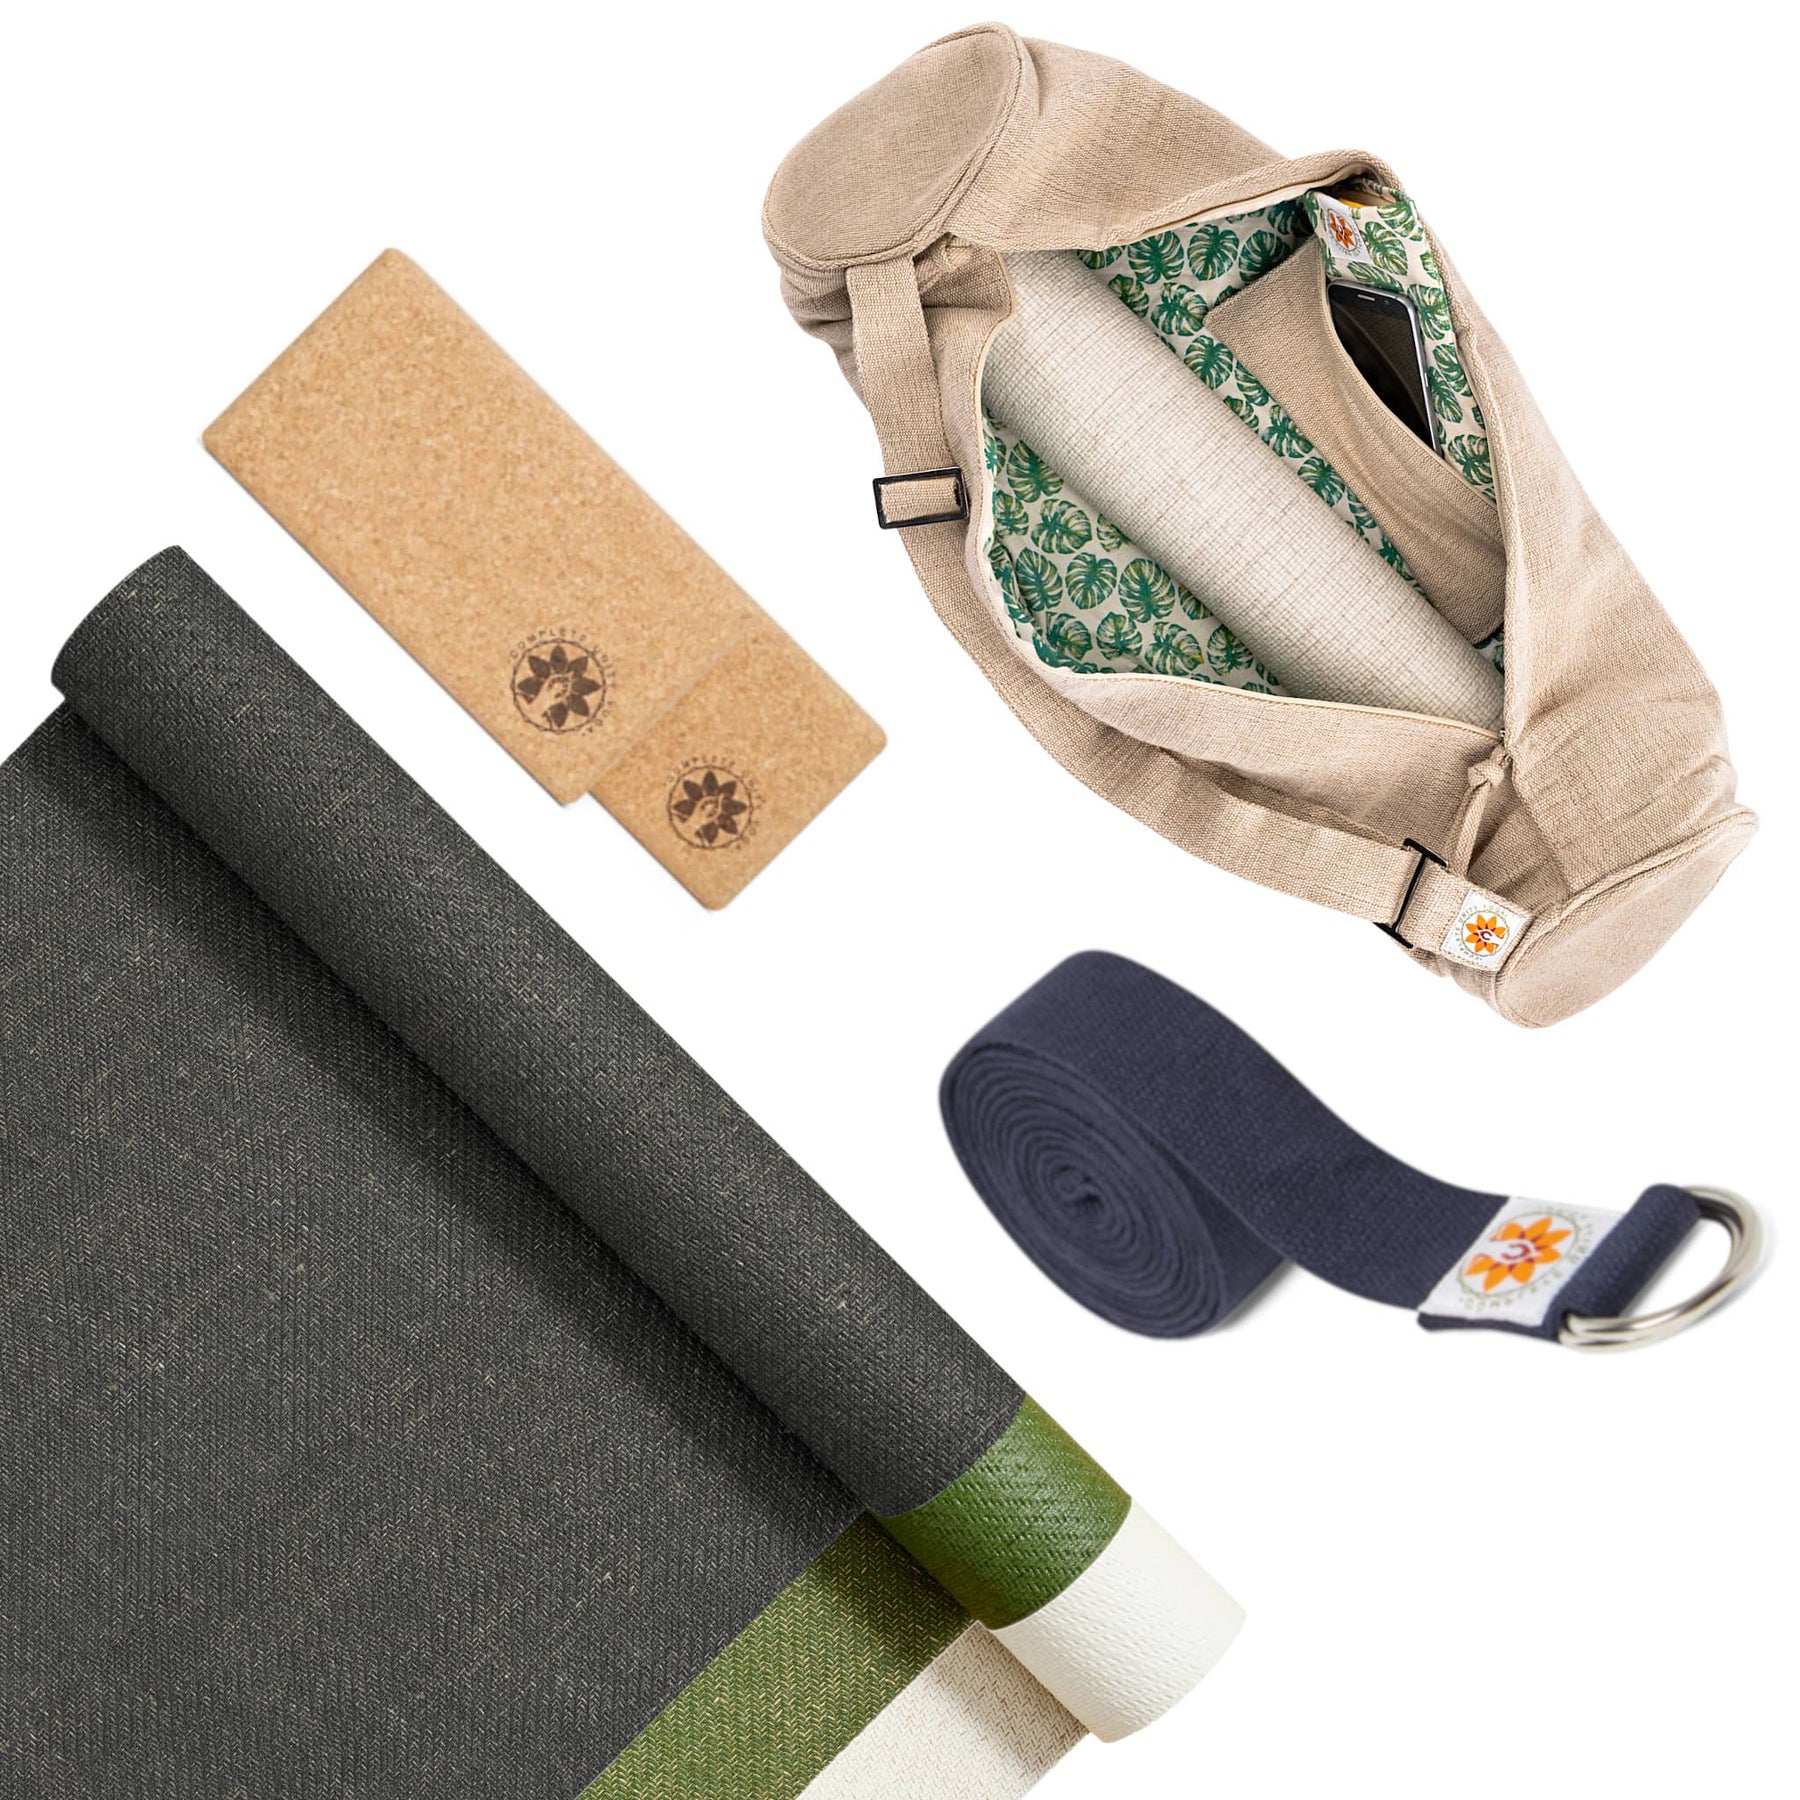 Buy Yoga Mat Bags Online - Mindful Jungle - Sustainable Natural Fabric –  Complete Unity Yoga